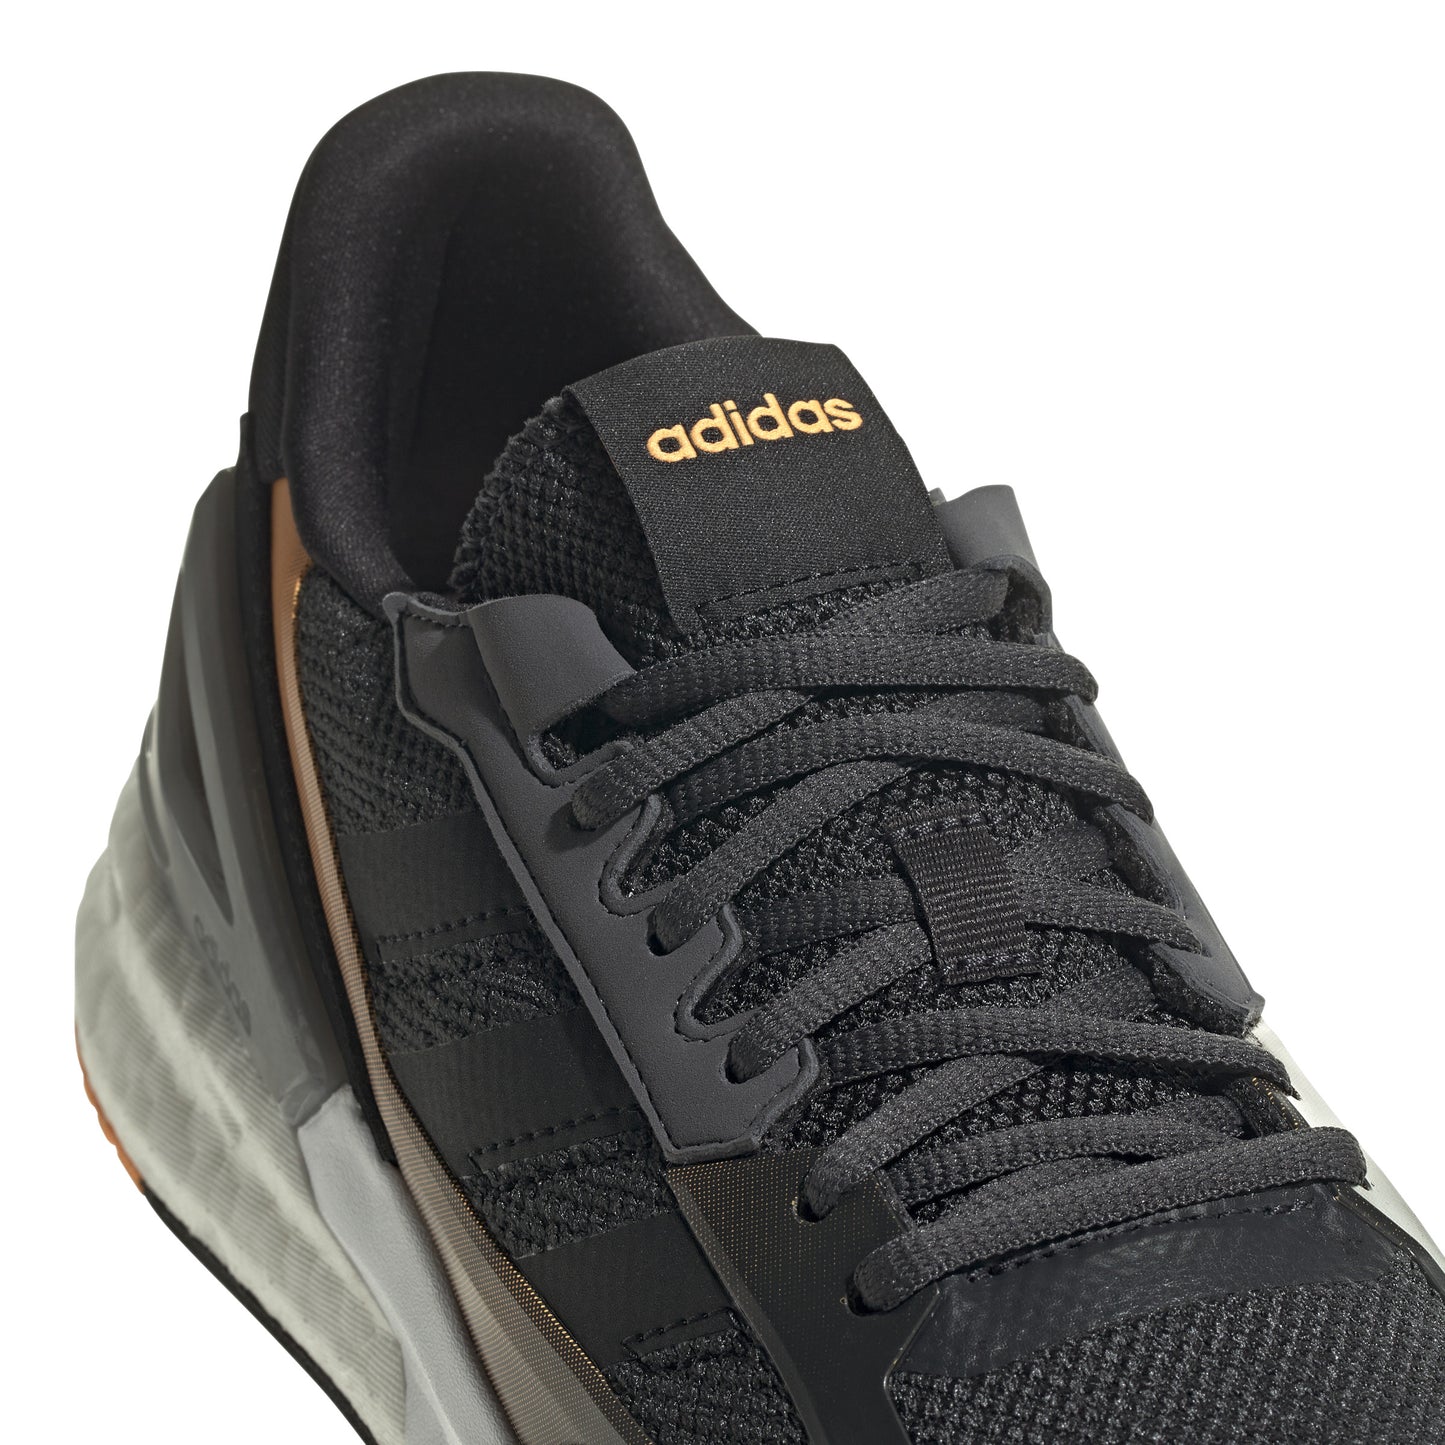 Adidas Nebzed Super Boost Trainers